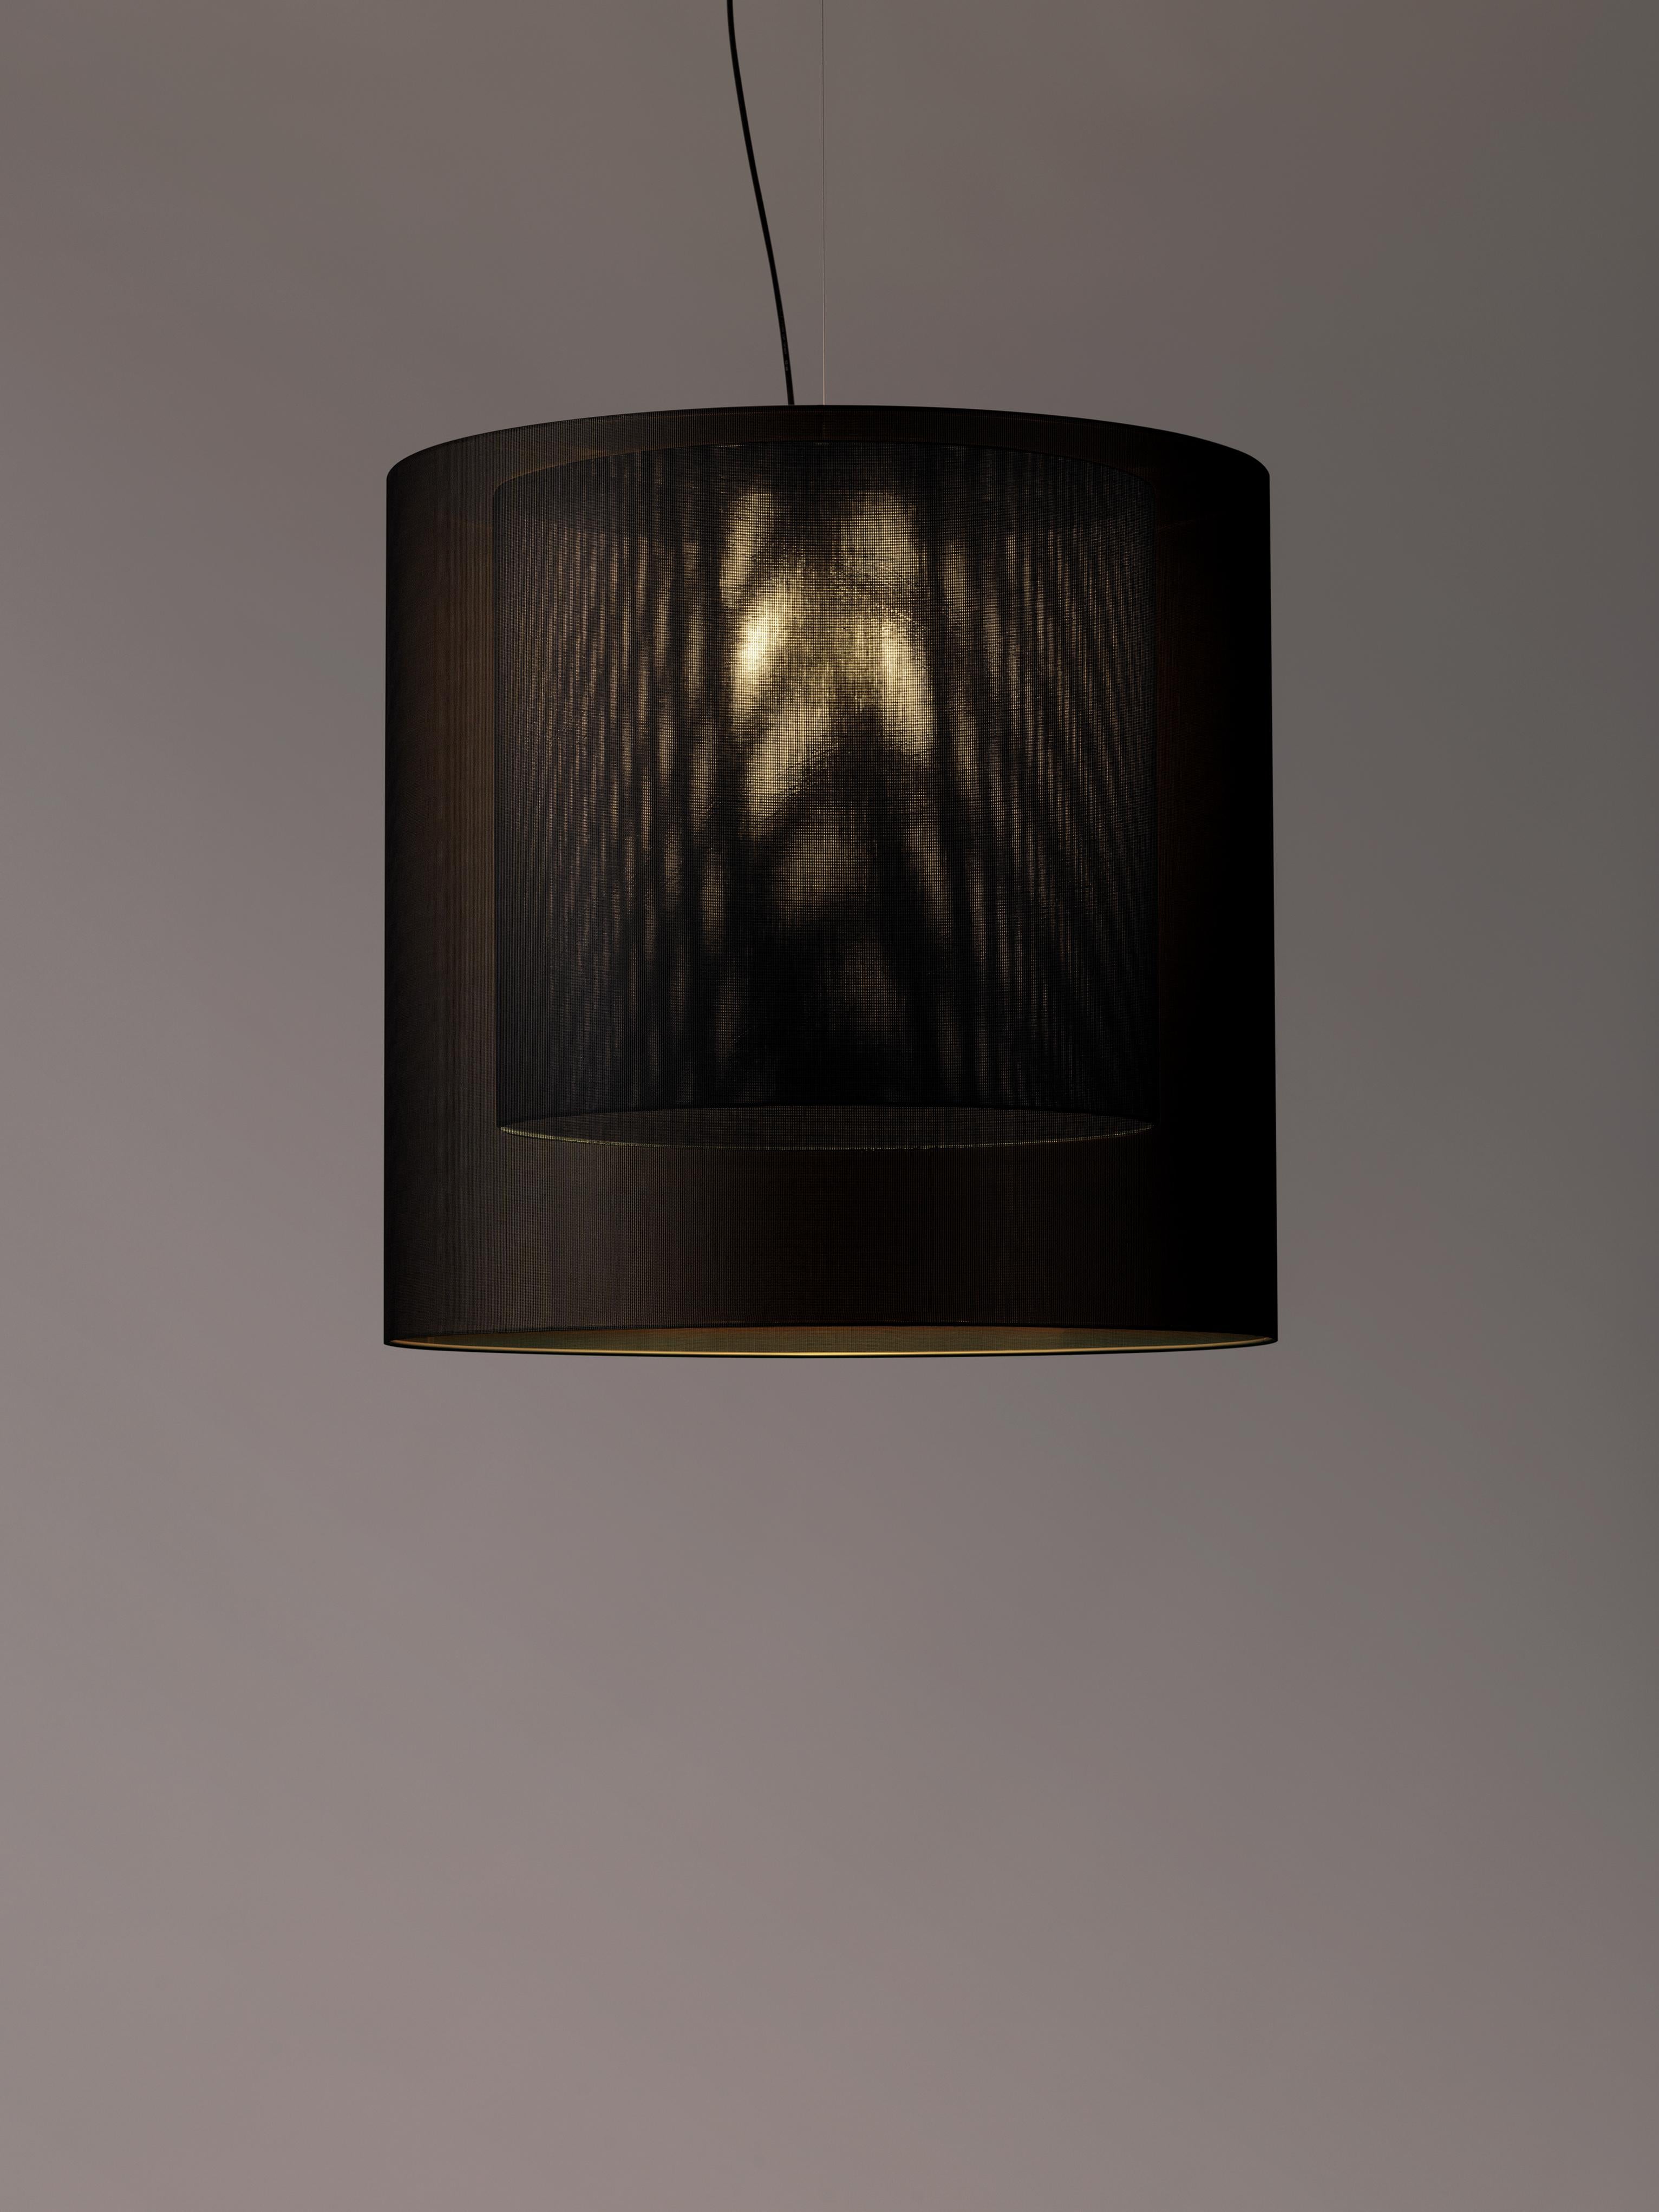 Black Moaré XL pendant lamp by Antoni Arola.
Dimensions: D 83 x H 81 cm.
Materials: Metal, polyester.
Available in other colors and sizes.

Moaré’s multiple combinations of formats and colours make it highly versatile. The series takes its name